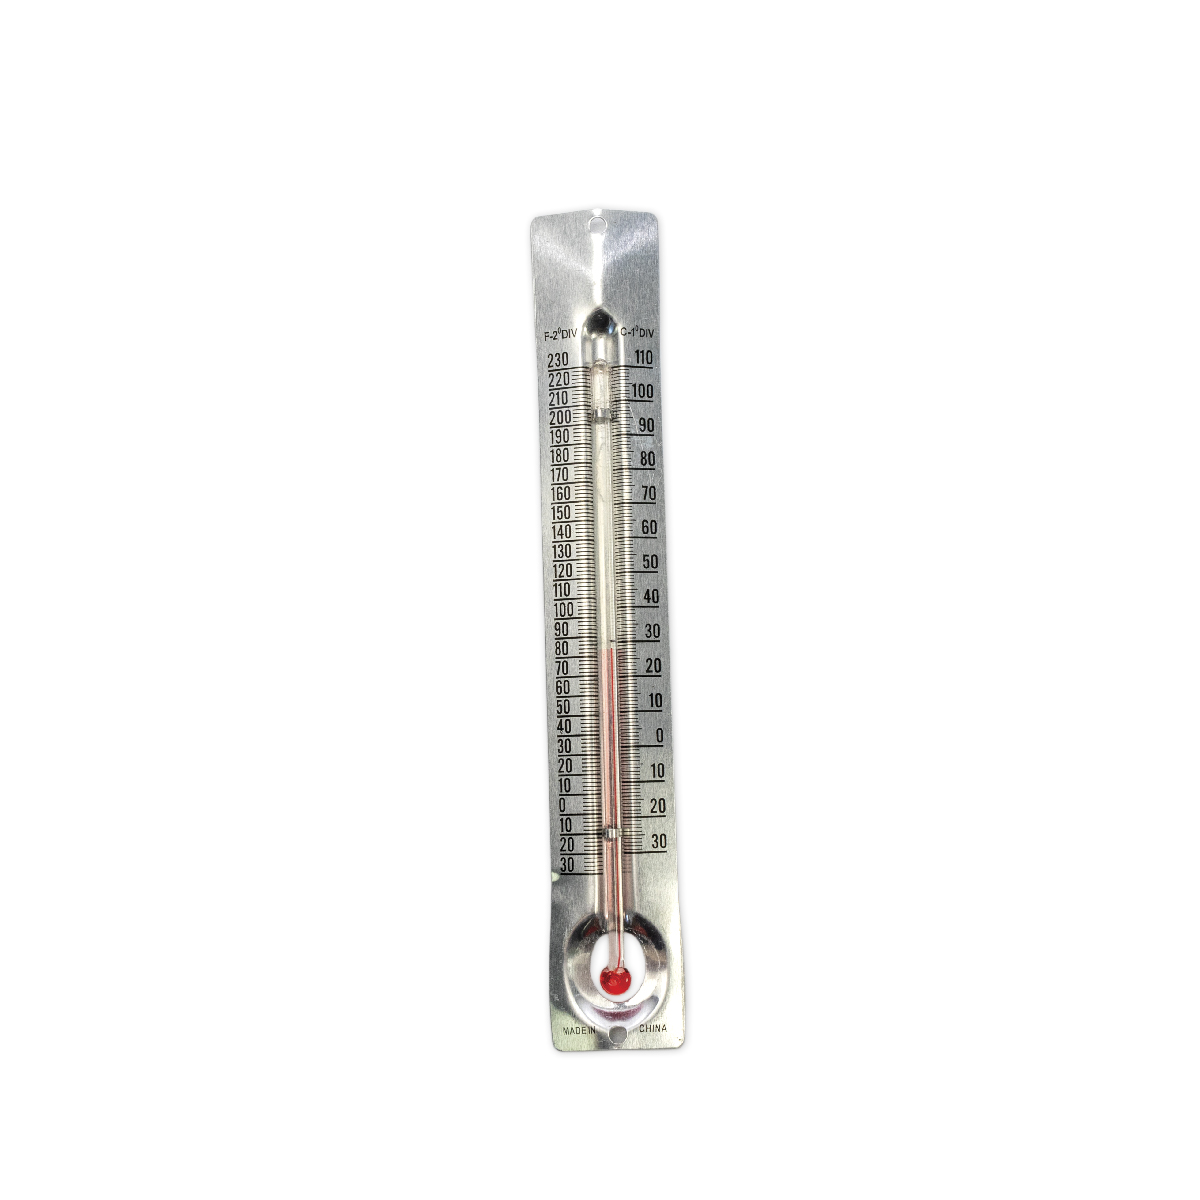 Room Thermometer with Flat Metal Back, Celsius - Fahrenheit